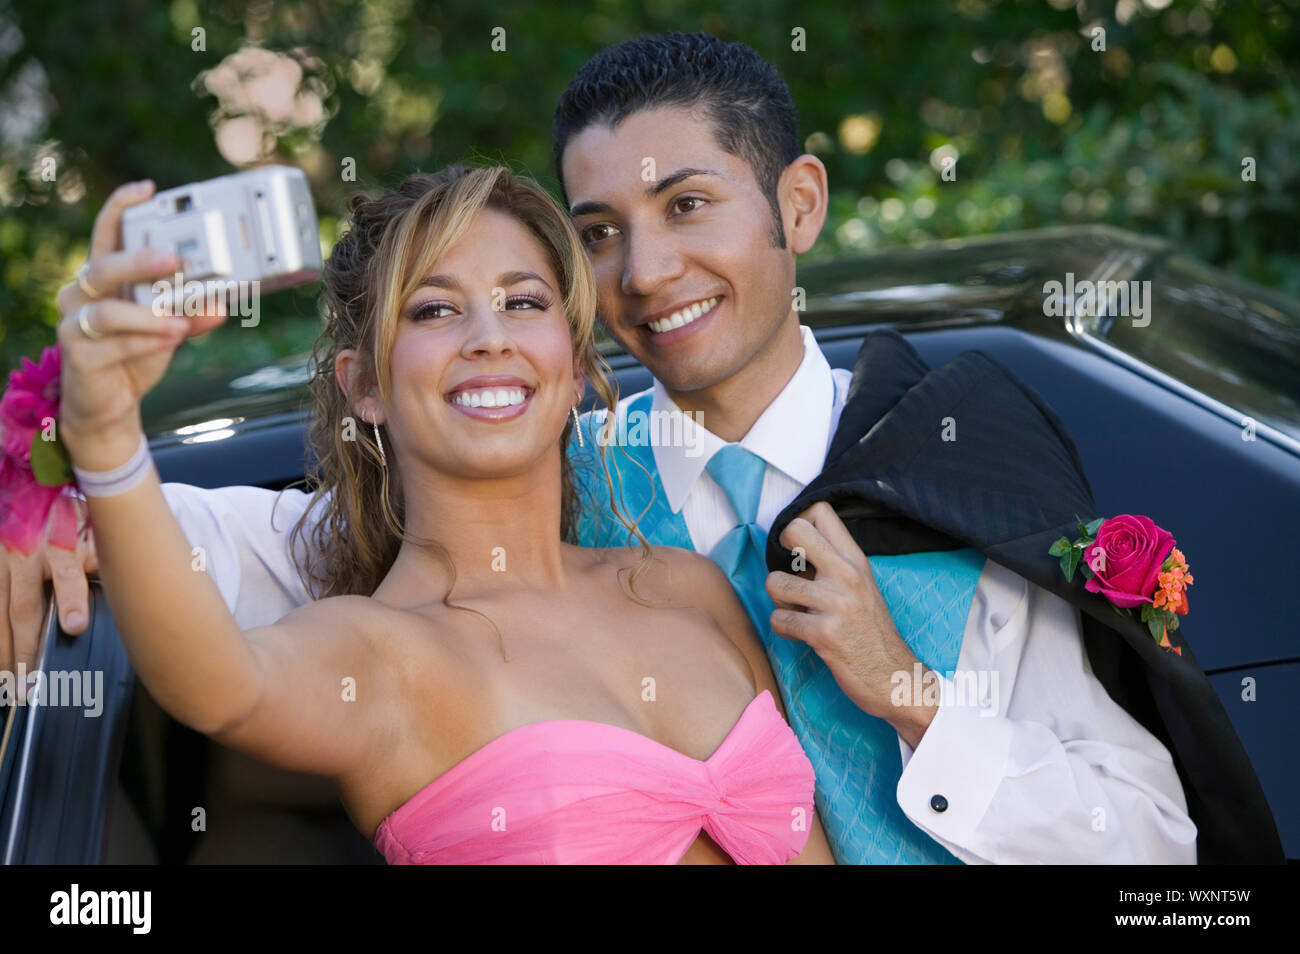 Teenage Girl Snapping Photo at Prom Stock Photo